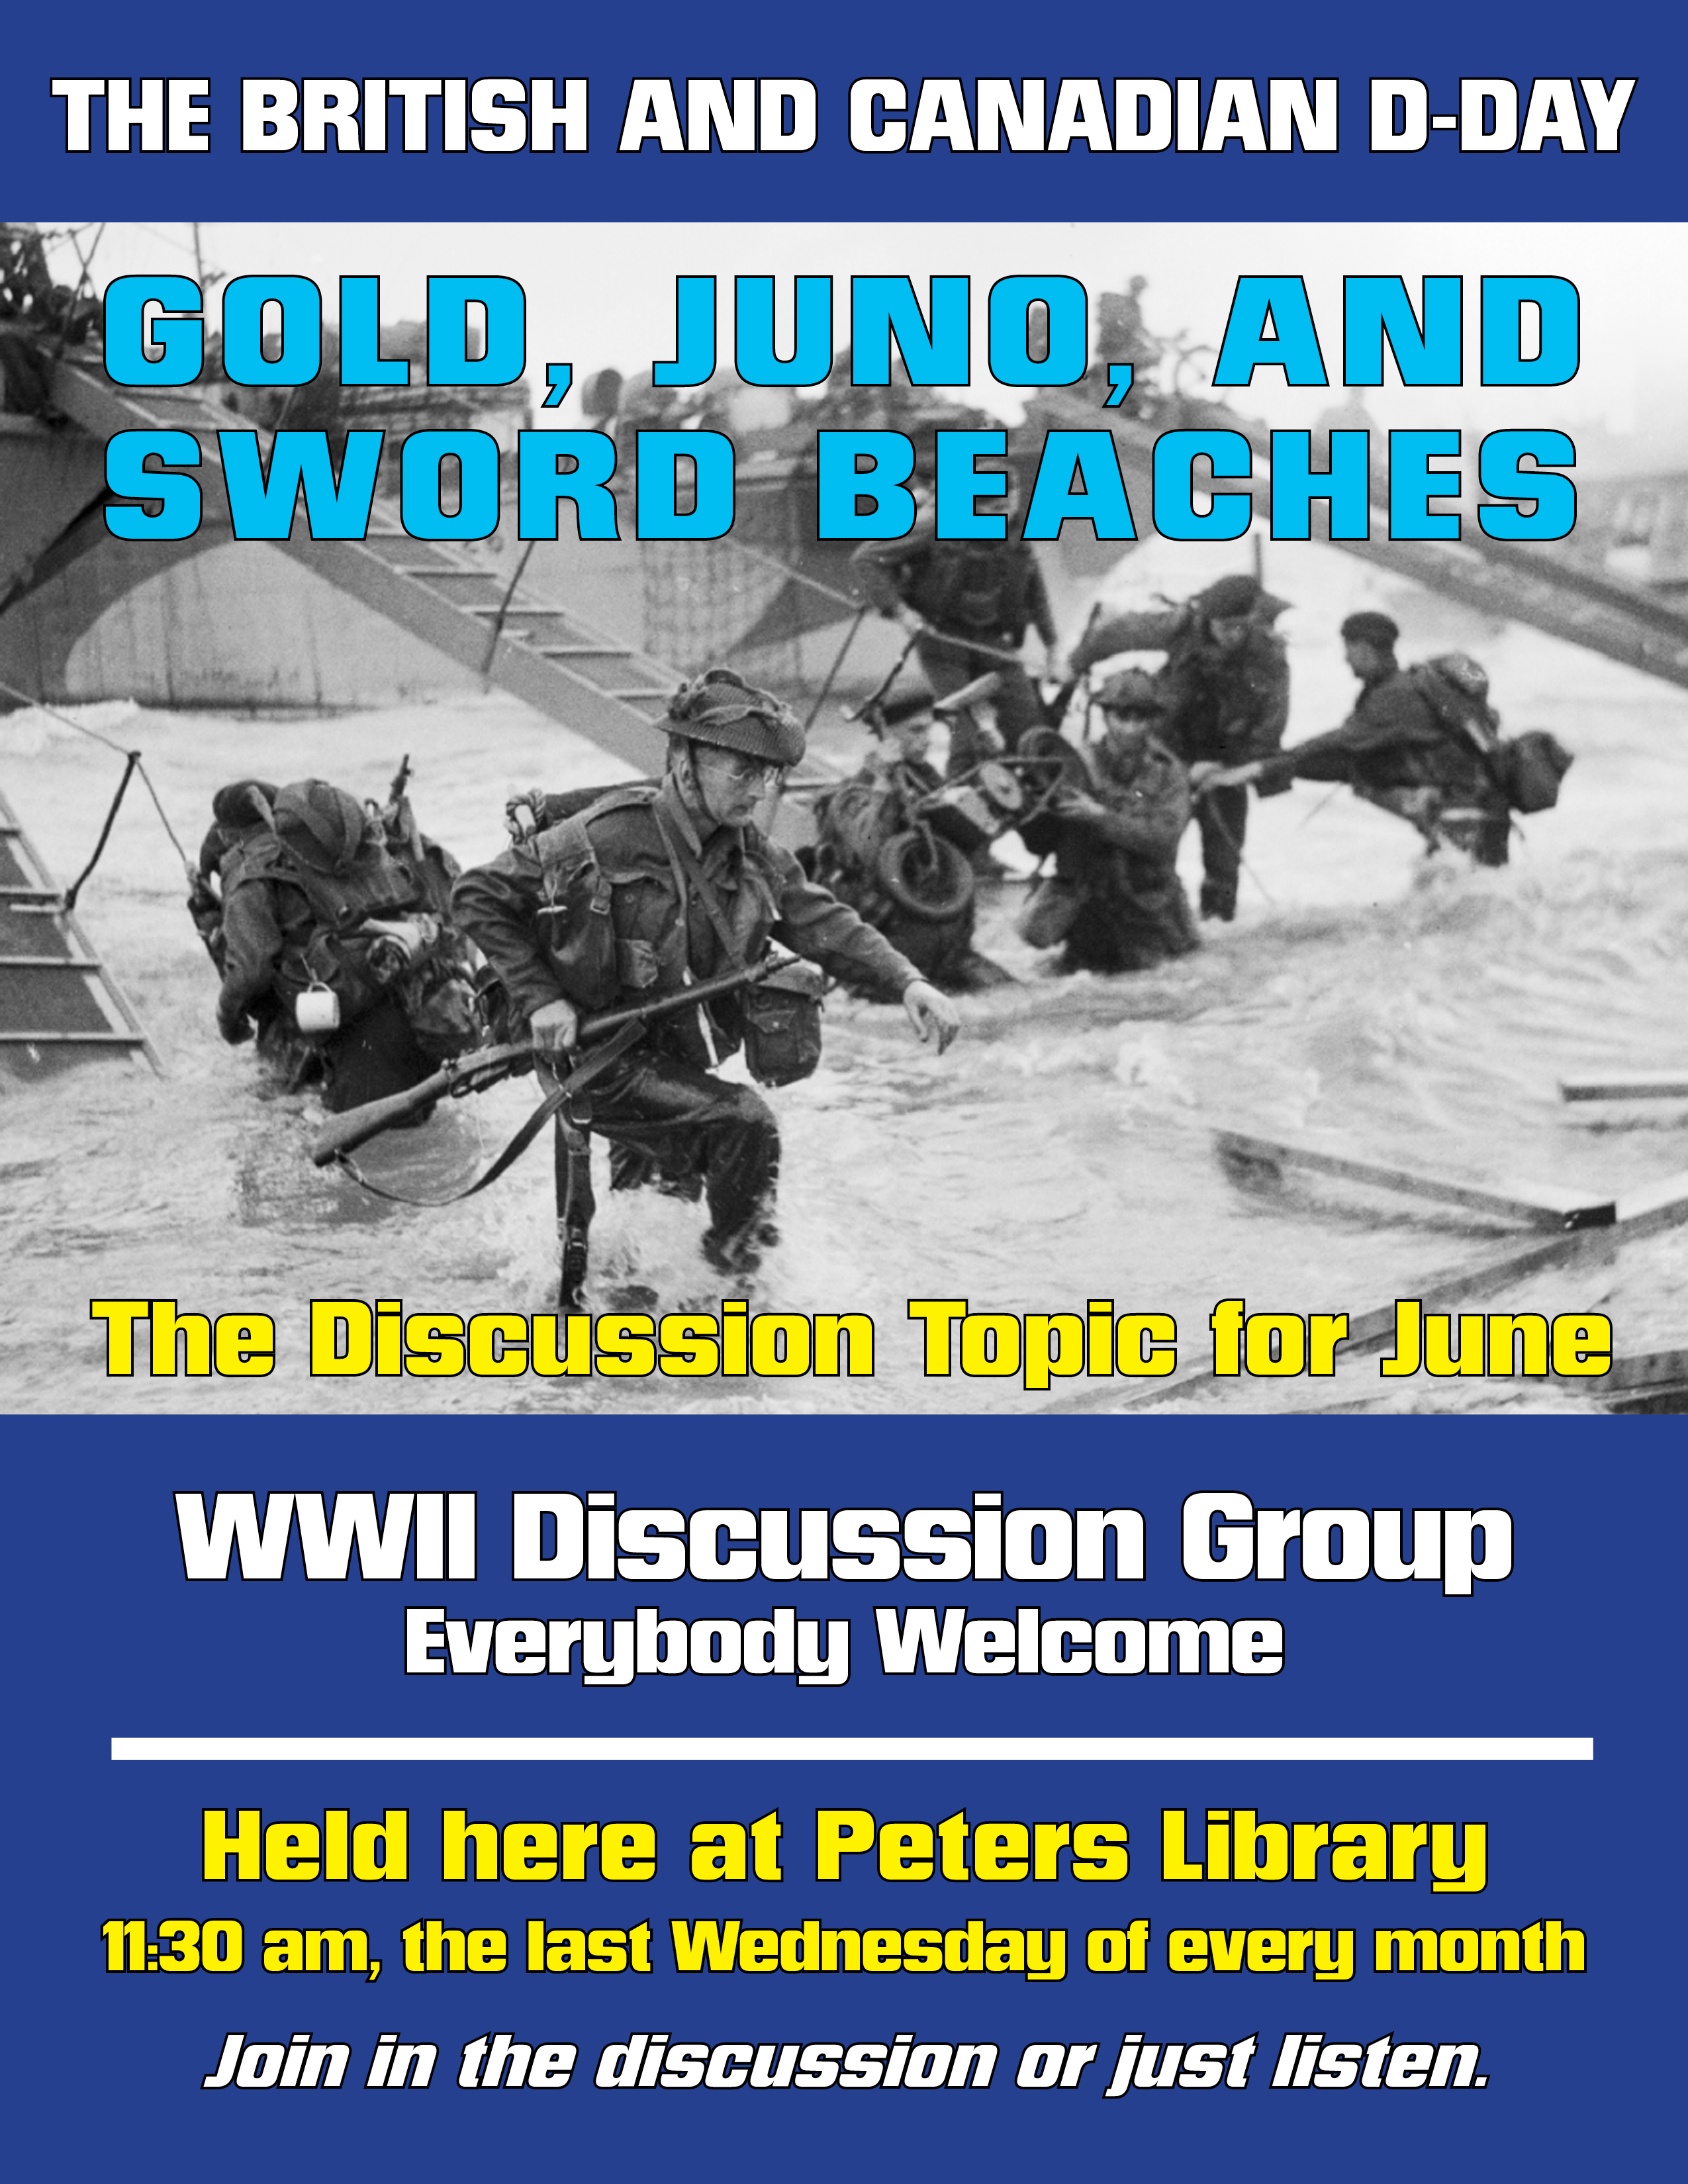 WWII Discussion Group Everybody Welcome June's Discussion Topic The British and Candian D-Day Gold, Juno, and Sword Beaches. Image of British or Canadian Soldiers leaving boats and entering beach on D-Day